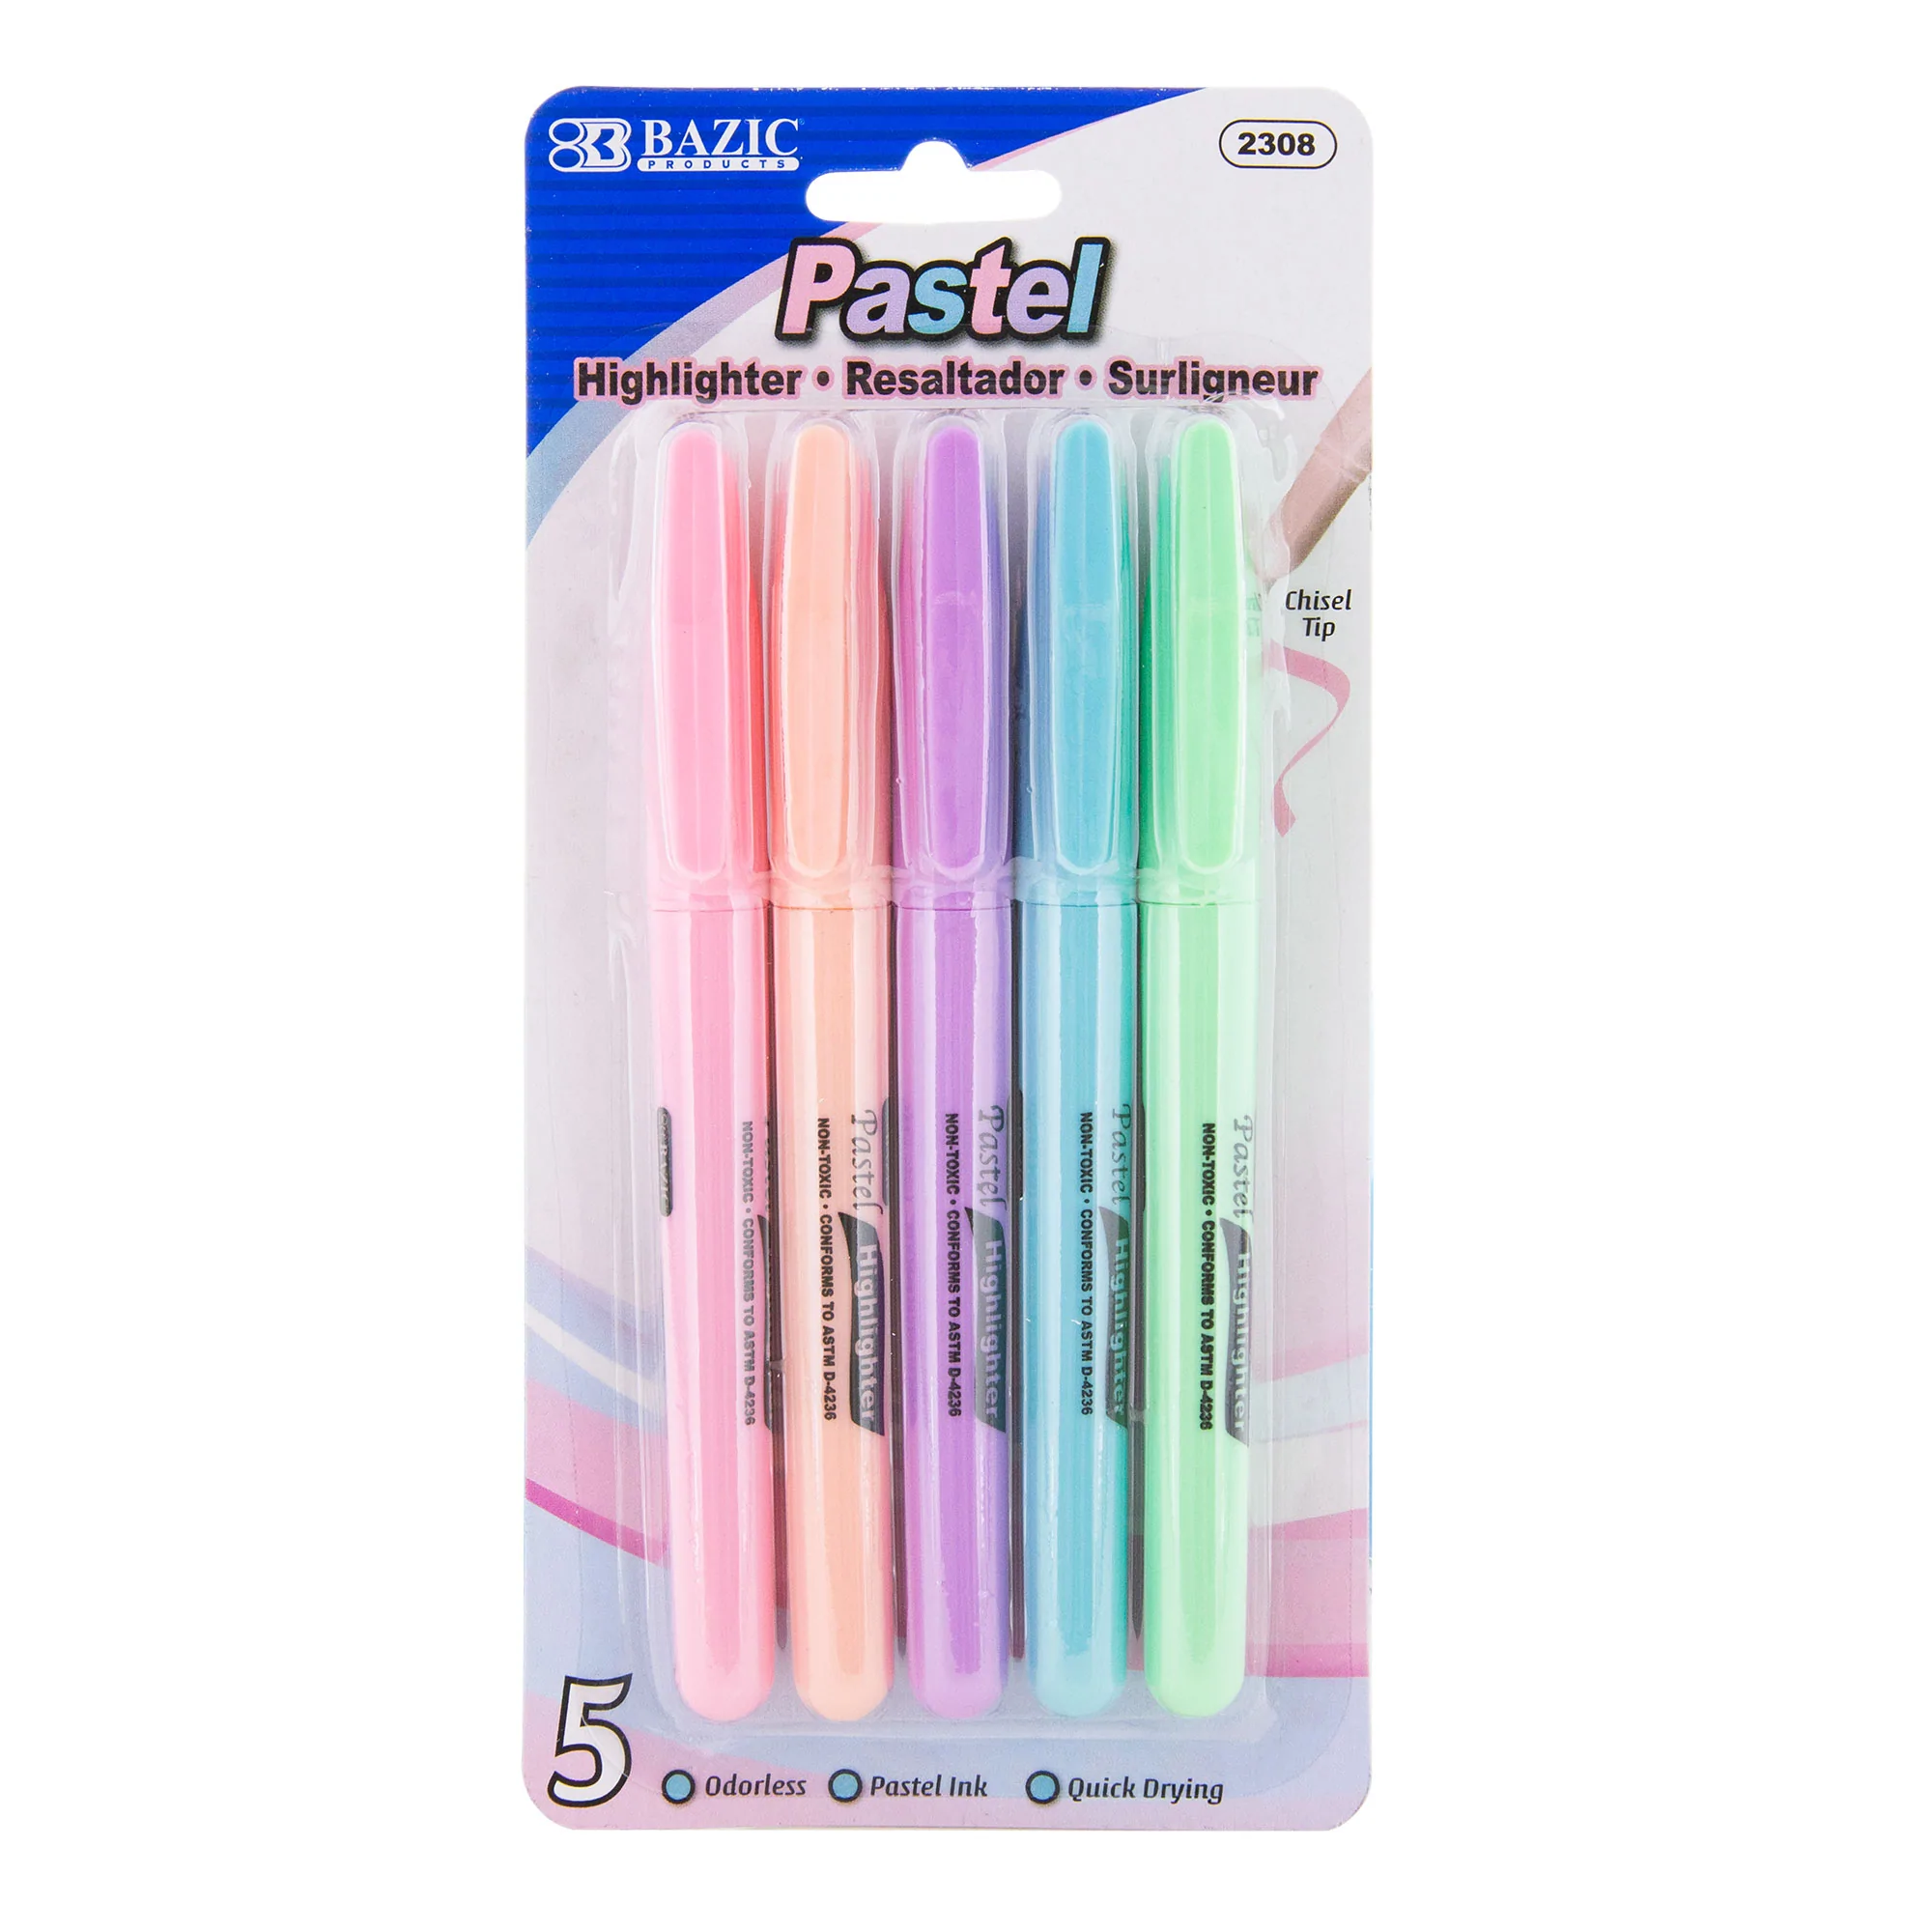 https://theceocreative.com/wp-content/uploads/2022/12/Pen-Style-Pastel-Assorted-Colors-Highlighter.webp